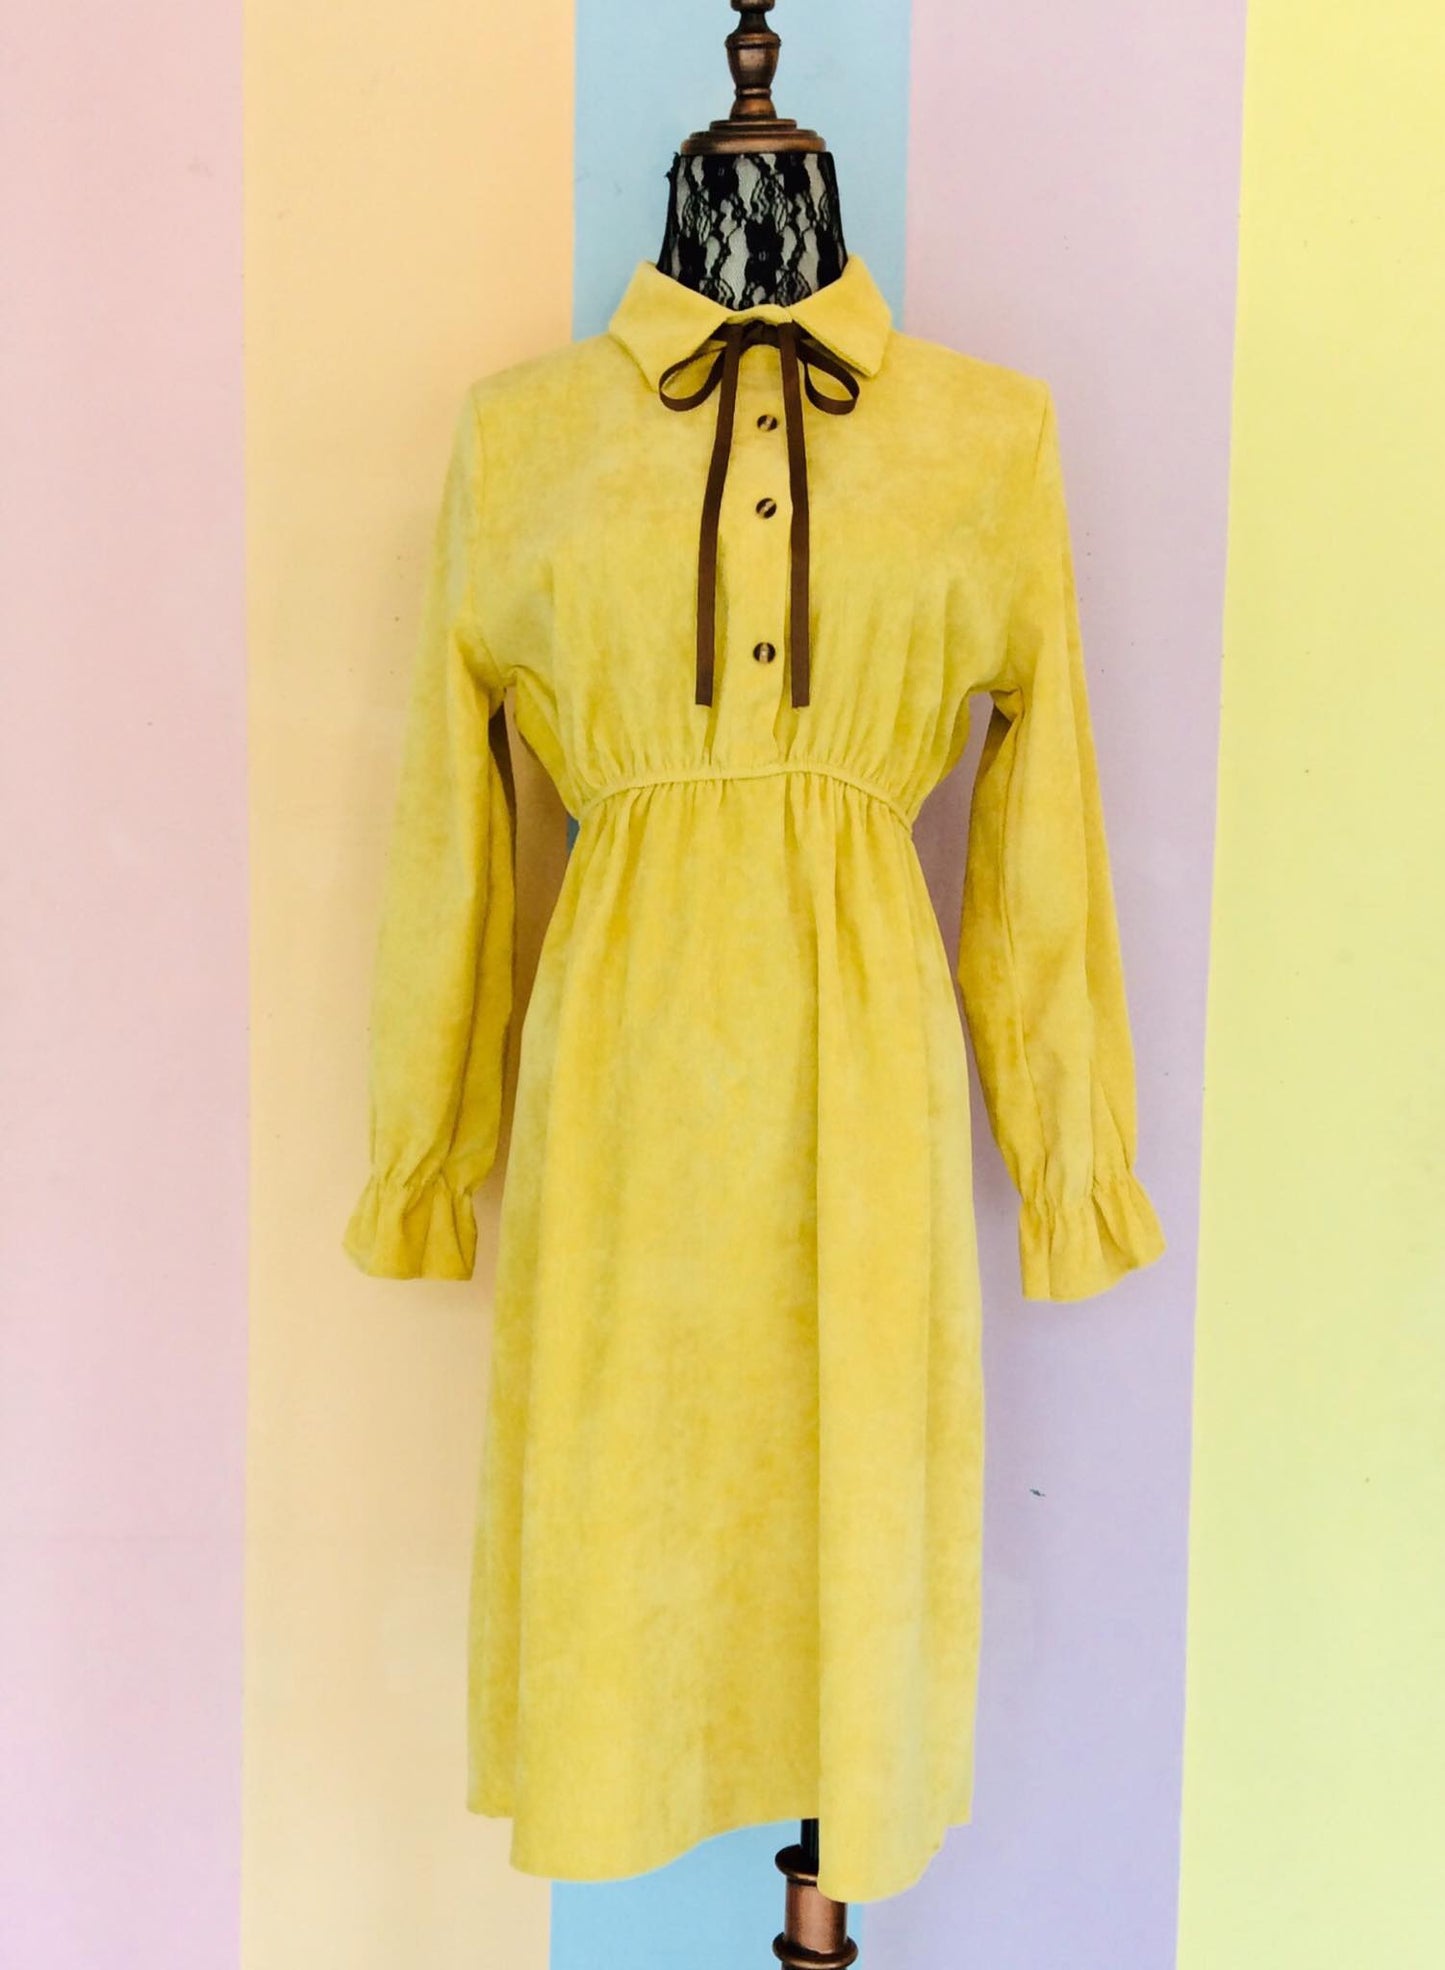 Corduroy Long Sleeves Dress w/ Elastic Waist and Bow String